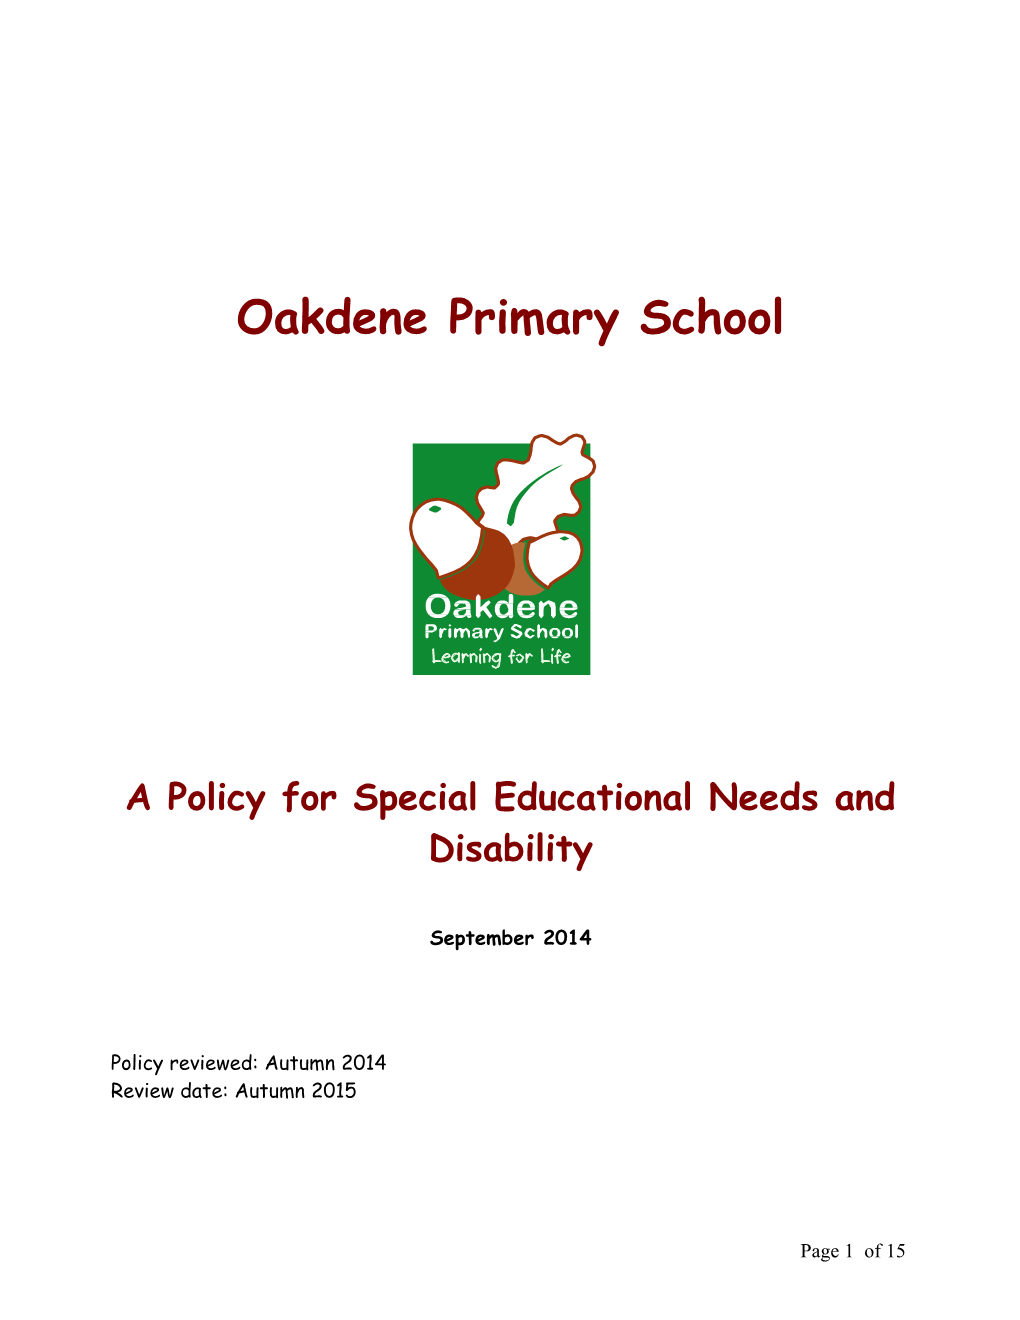 Yarm Primary School POLICY for SPECIAL EDUCATIONAL NEEDS